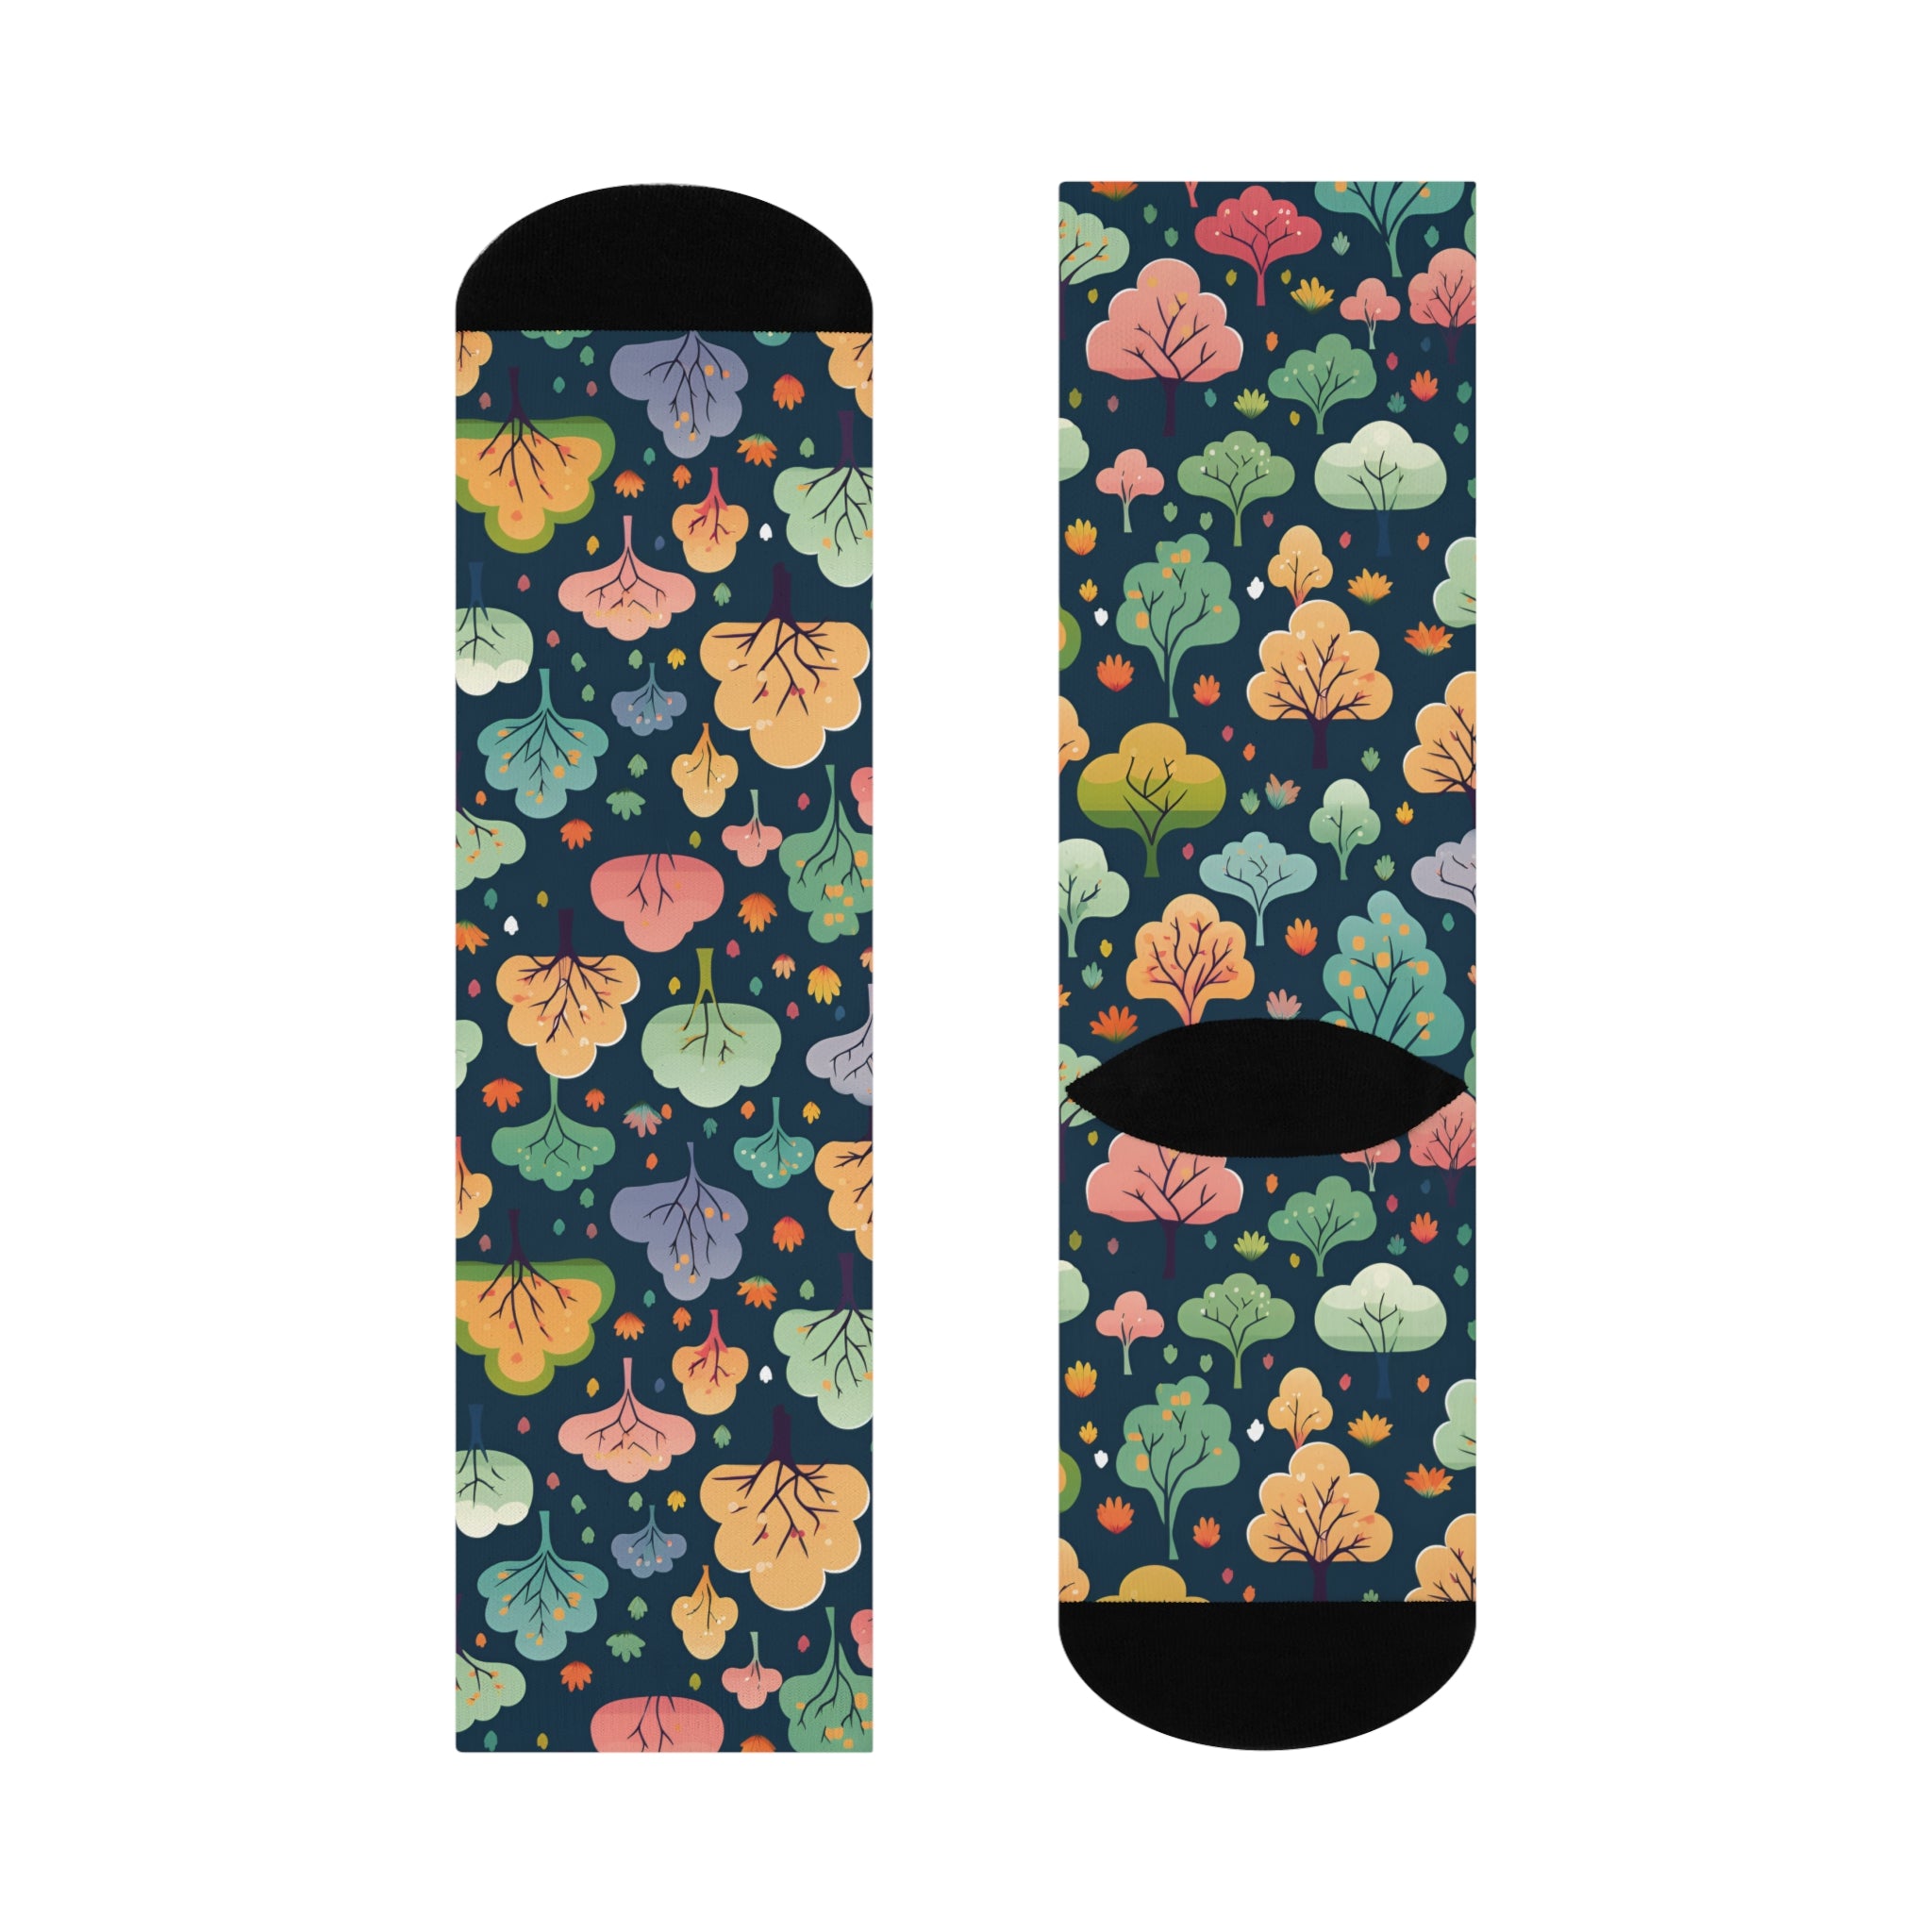 Colorful Forest Cushioned Crew Socks